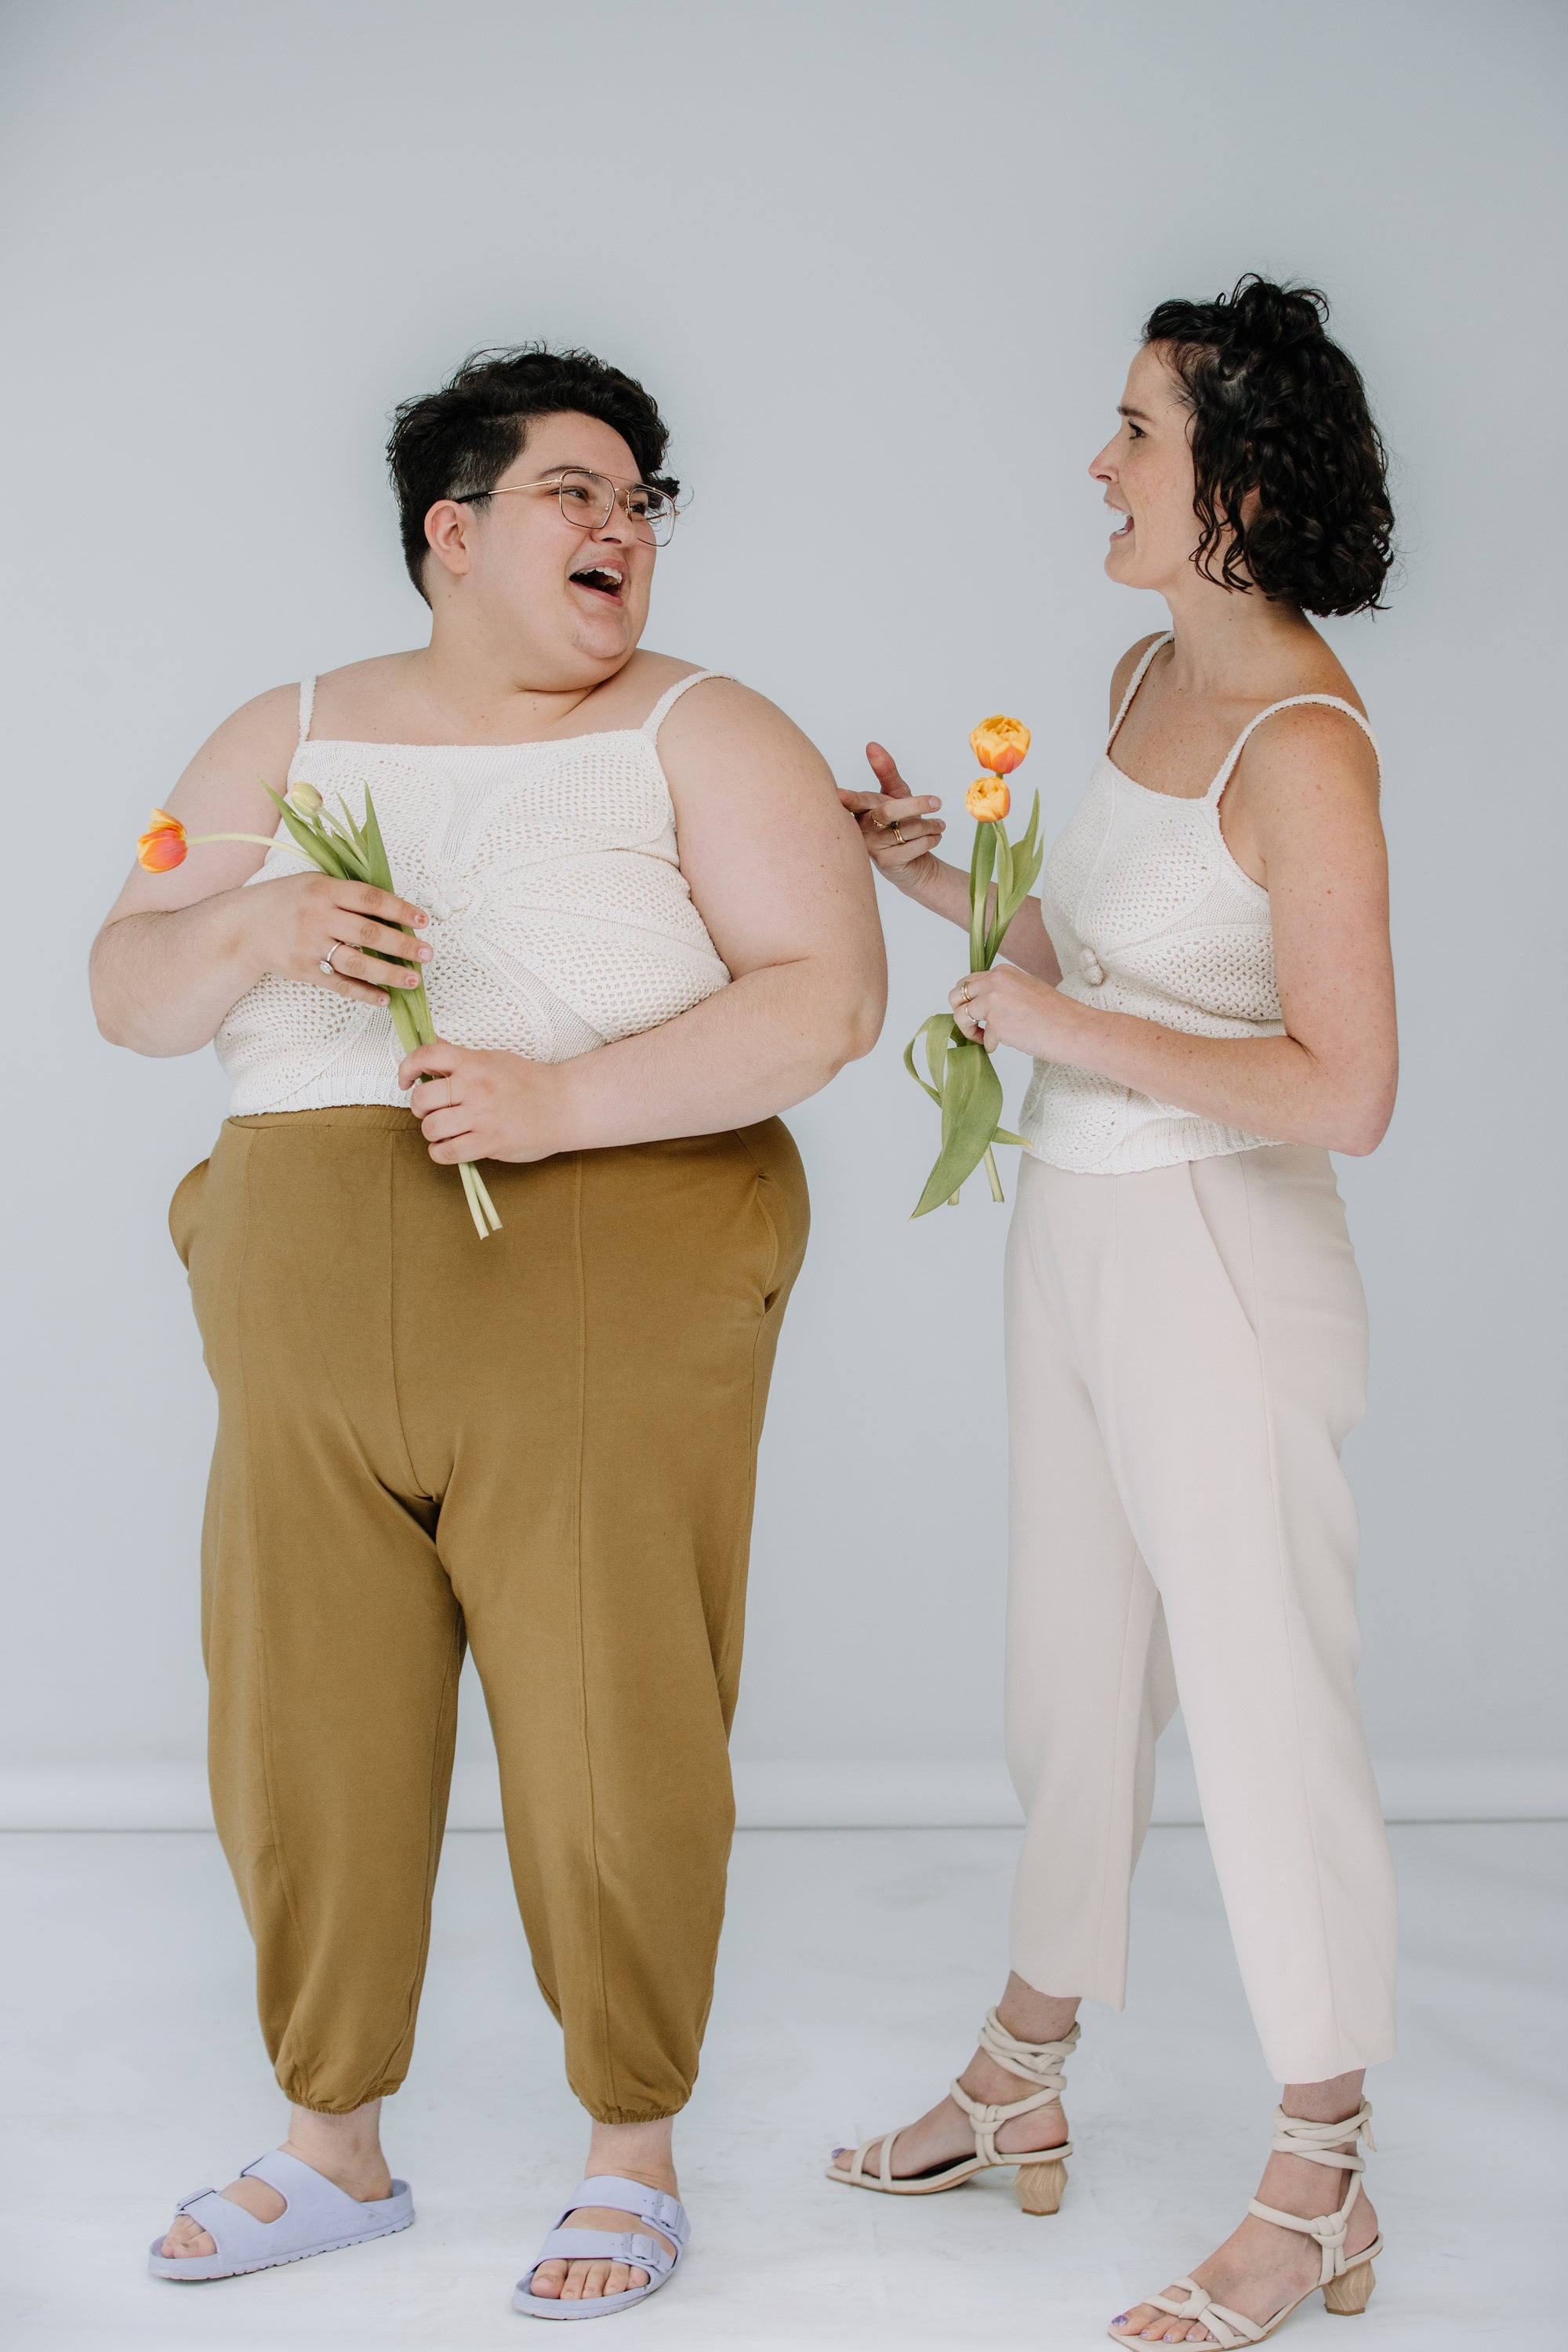 jules and lacey model the lingua franca crochet flower tank in ivory. jules is wearing theirs with mustard day lantern pants, and lacey has on kaarem sua trousers. they are both wearing sandals and talking.